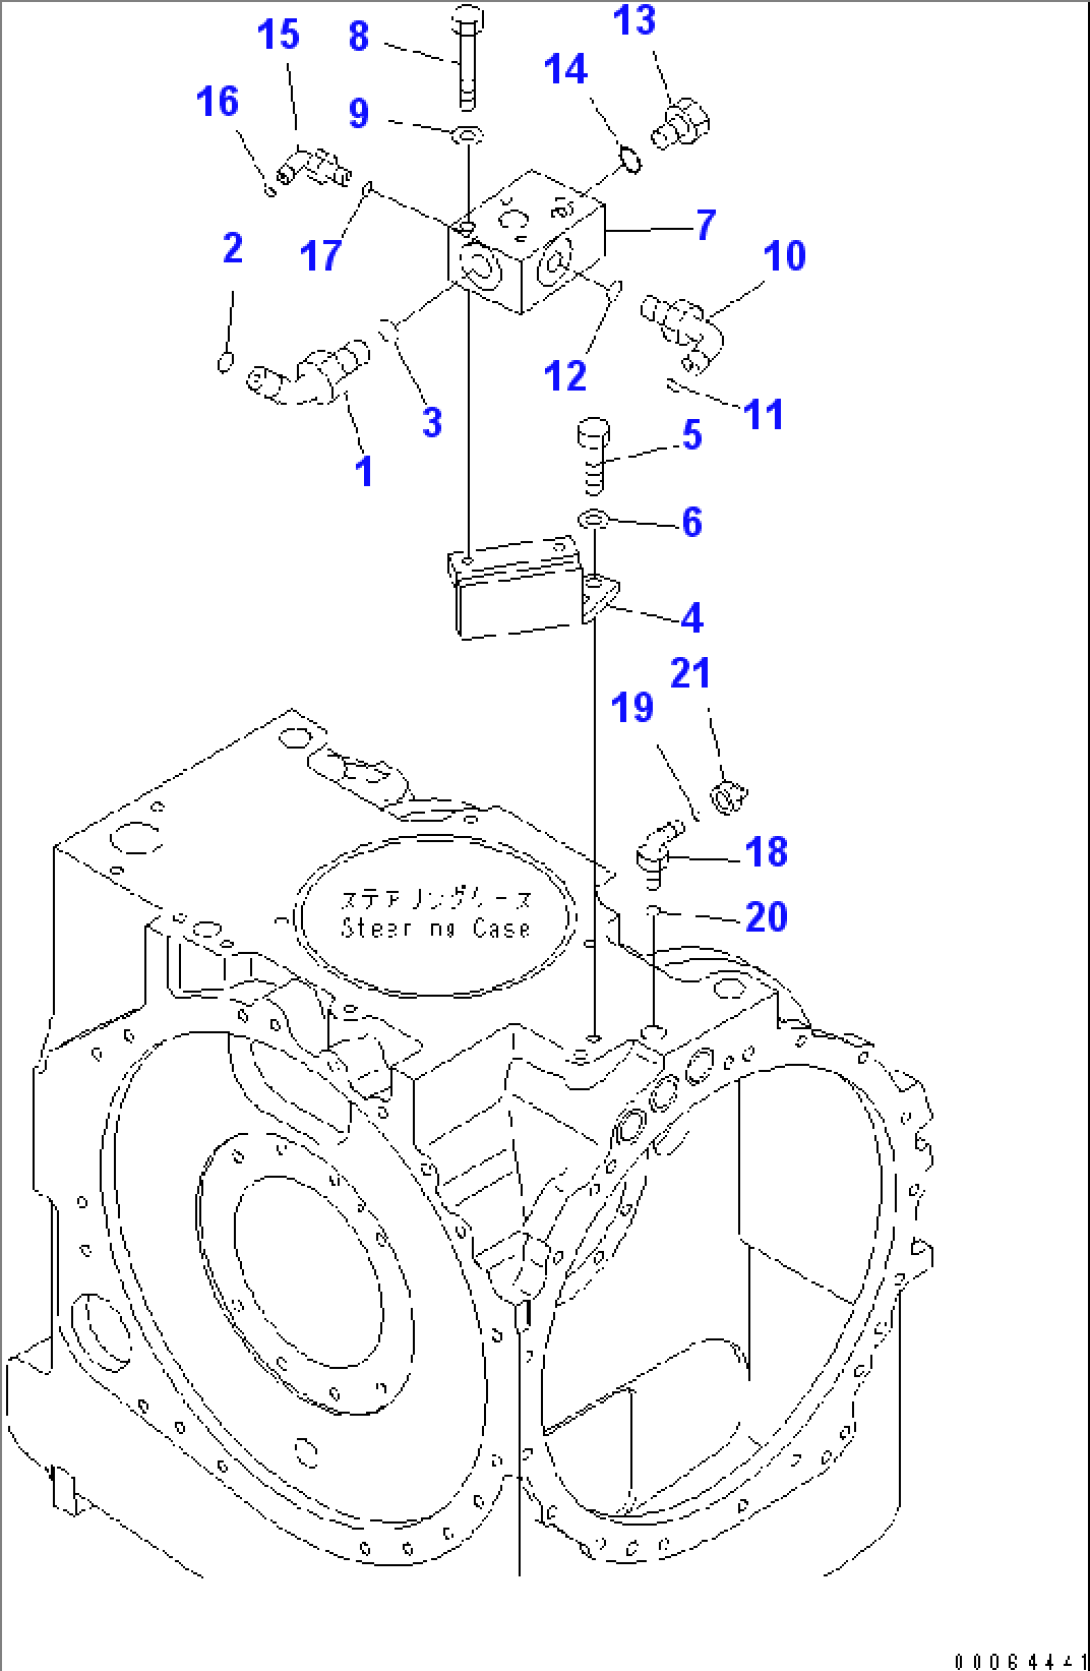 POWER TRAIN (PIPING AND BRACKET)(#85001-)